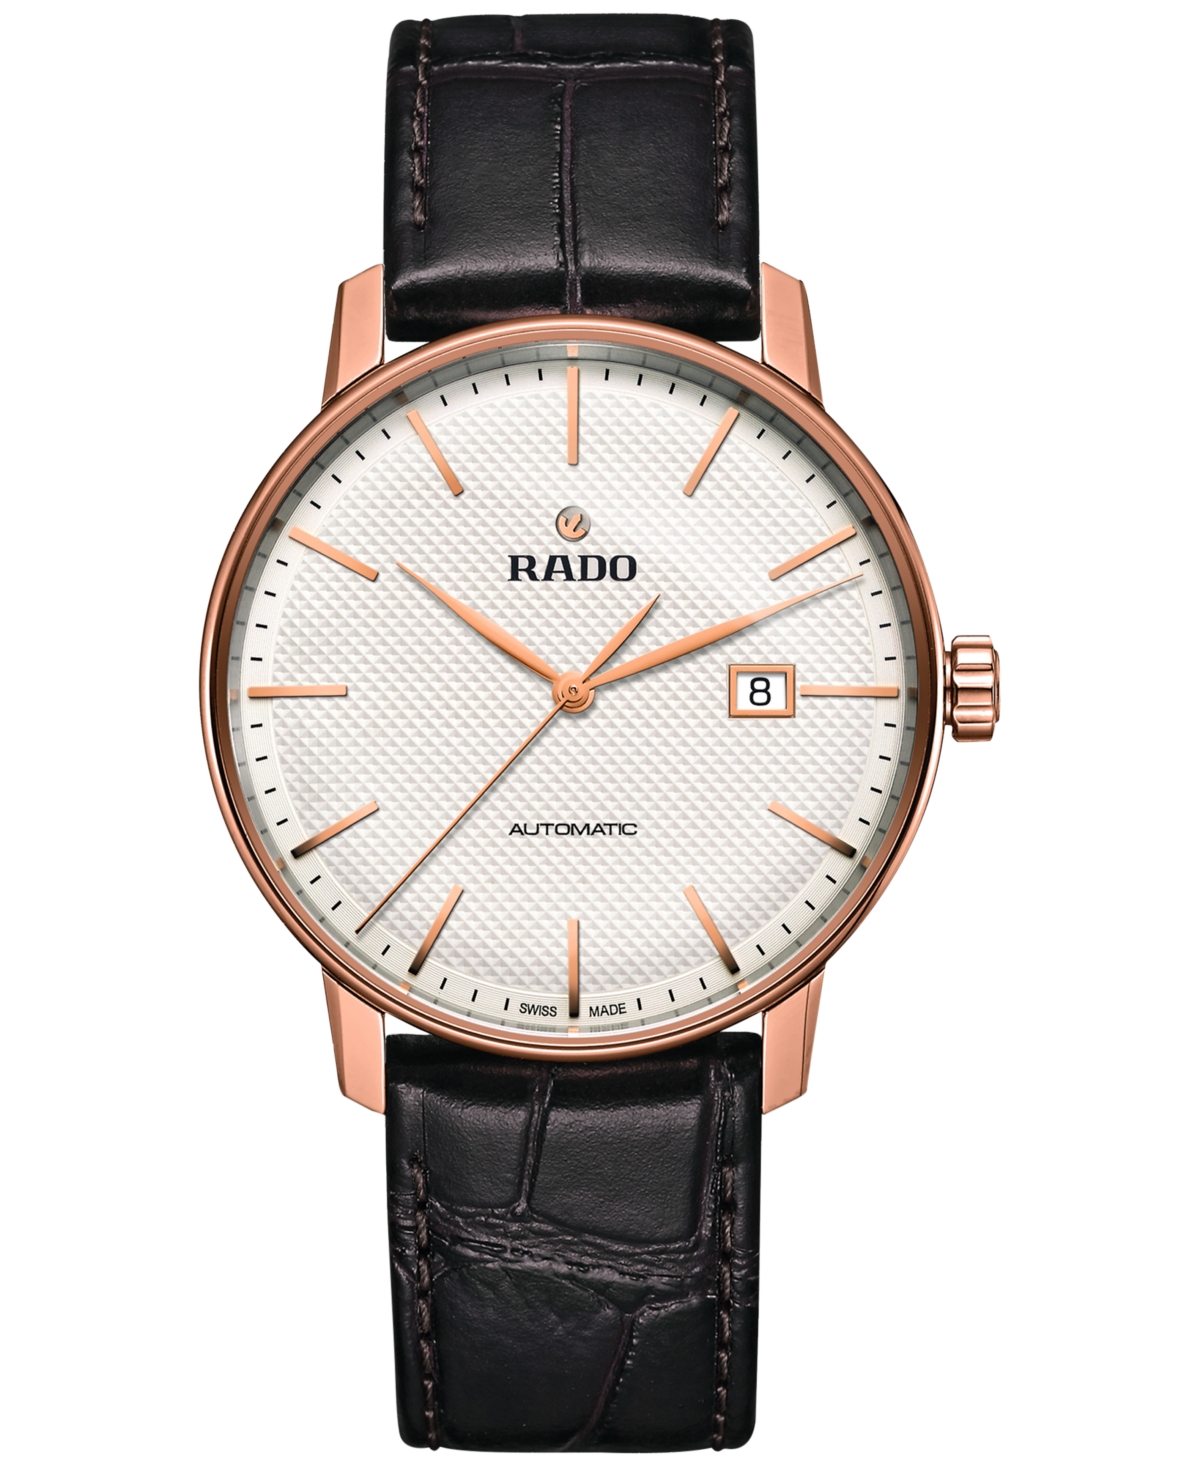 RADO MEN'S SWISS AUTOMATIC COUPOLE CLASSIC DARK BROWN LEATHER STRAP WATCH 41MM R22877025